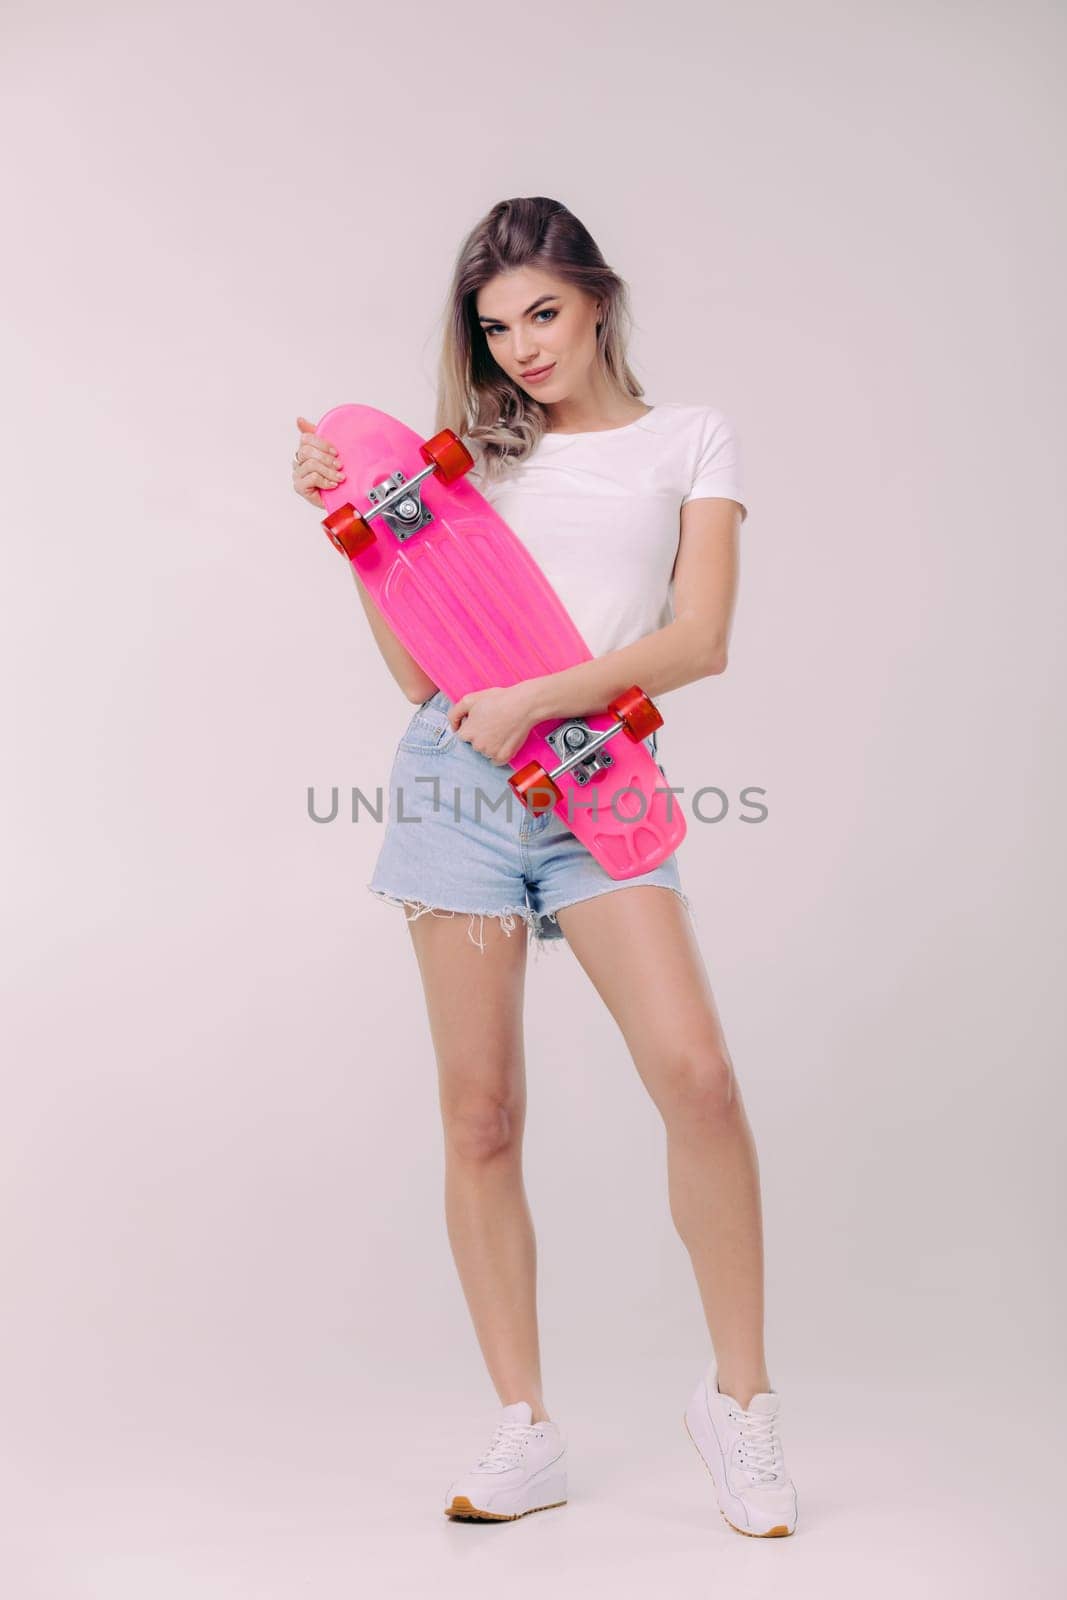 beautiful woman in white t-shirt with pink skateboard by erstudio